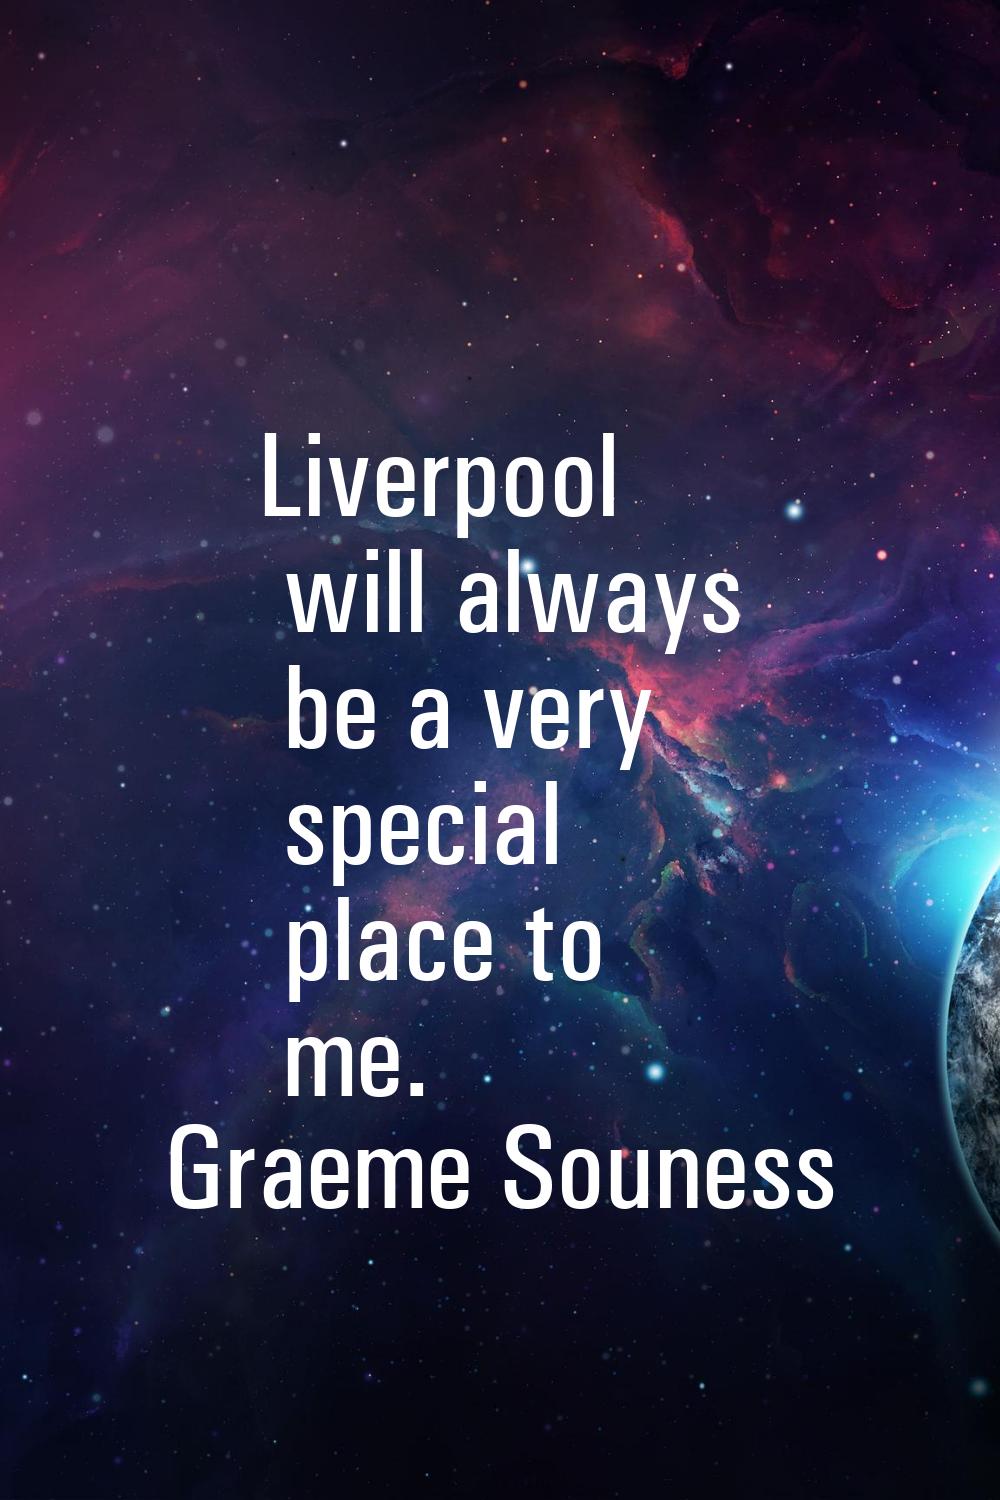 Liverpool will always be a very special place to me.